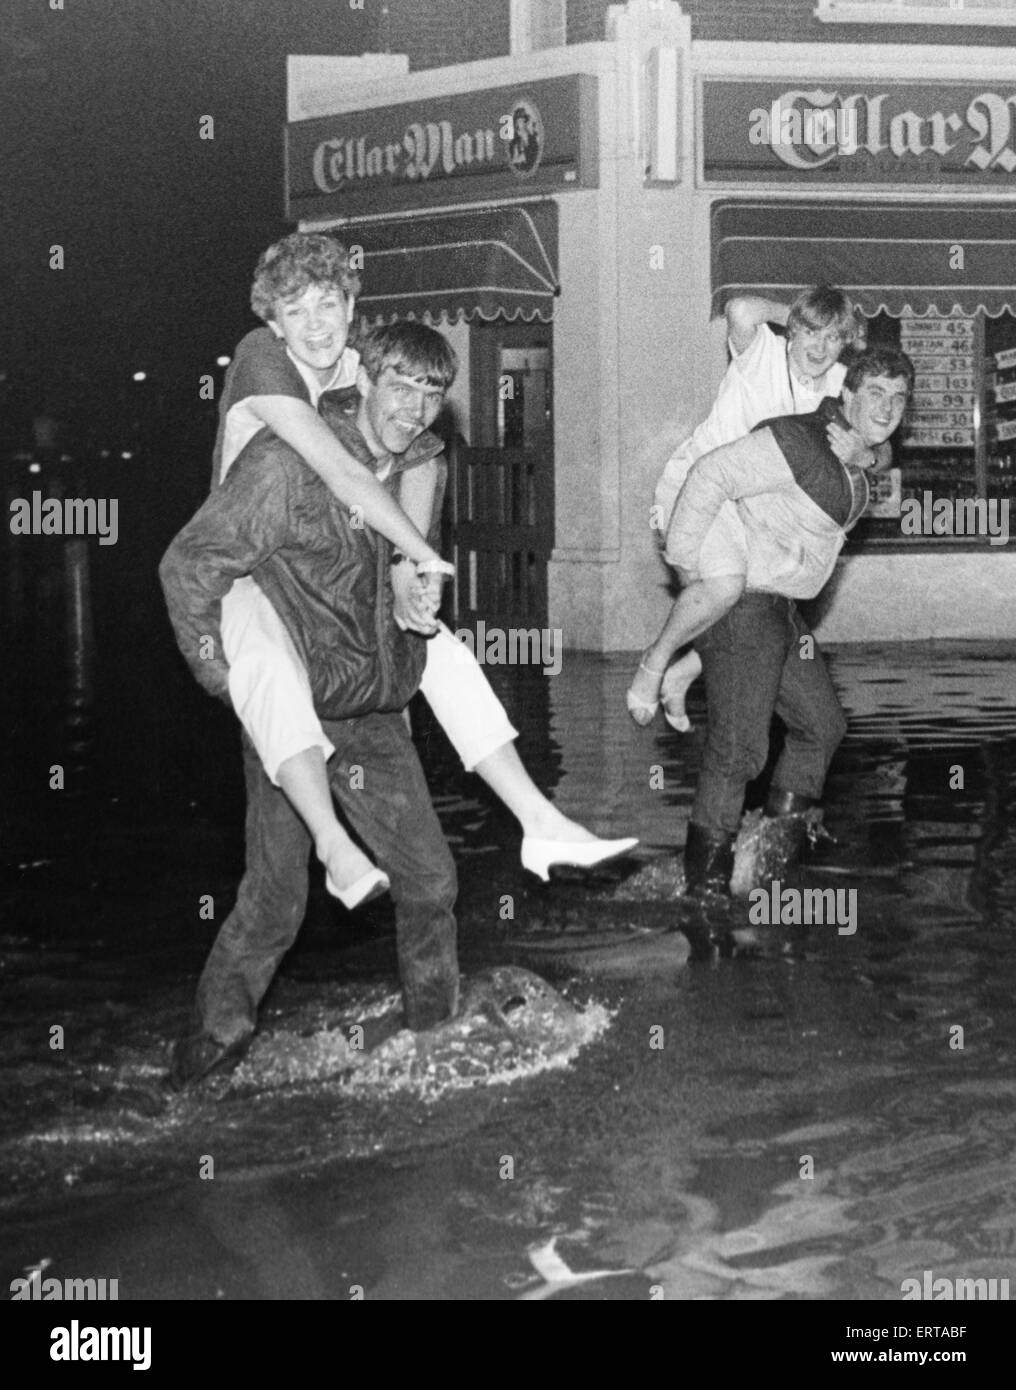 Carry on up the river at the junction of Roman Road and Rockliffe Road Middlesbrough following a local flood. Local lads help the girls across the flooded road 22nd June 1983 Stock Photo